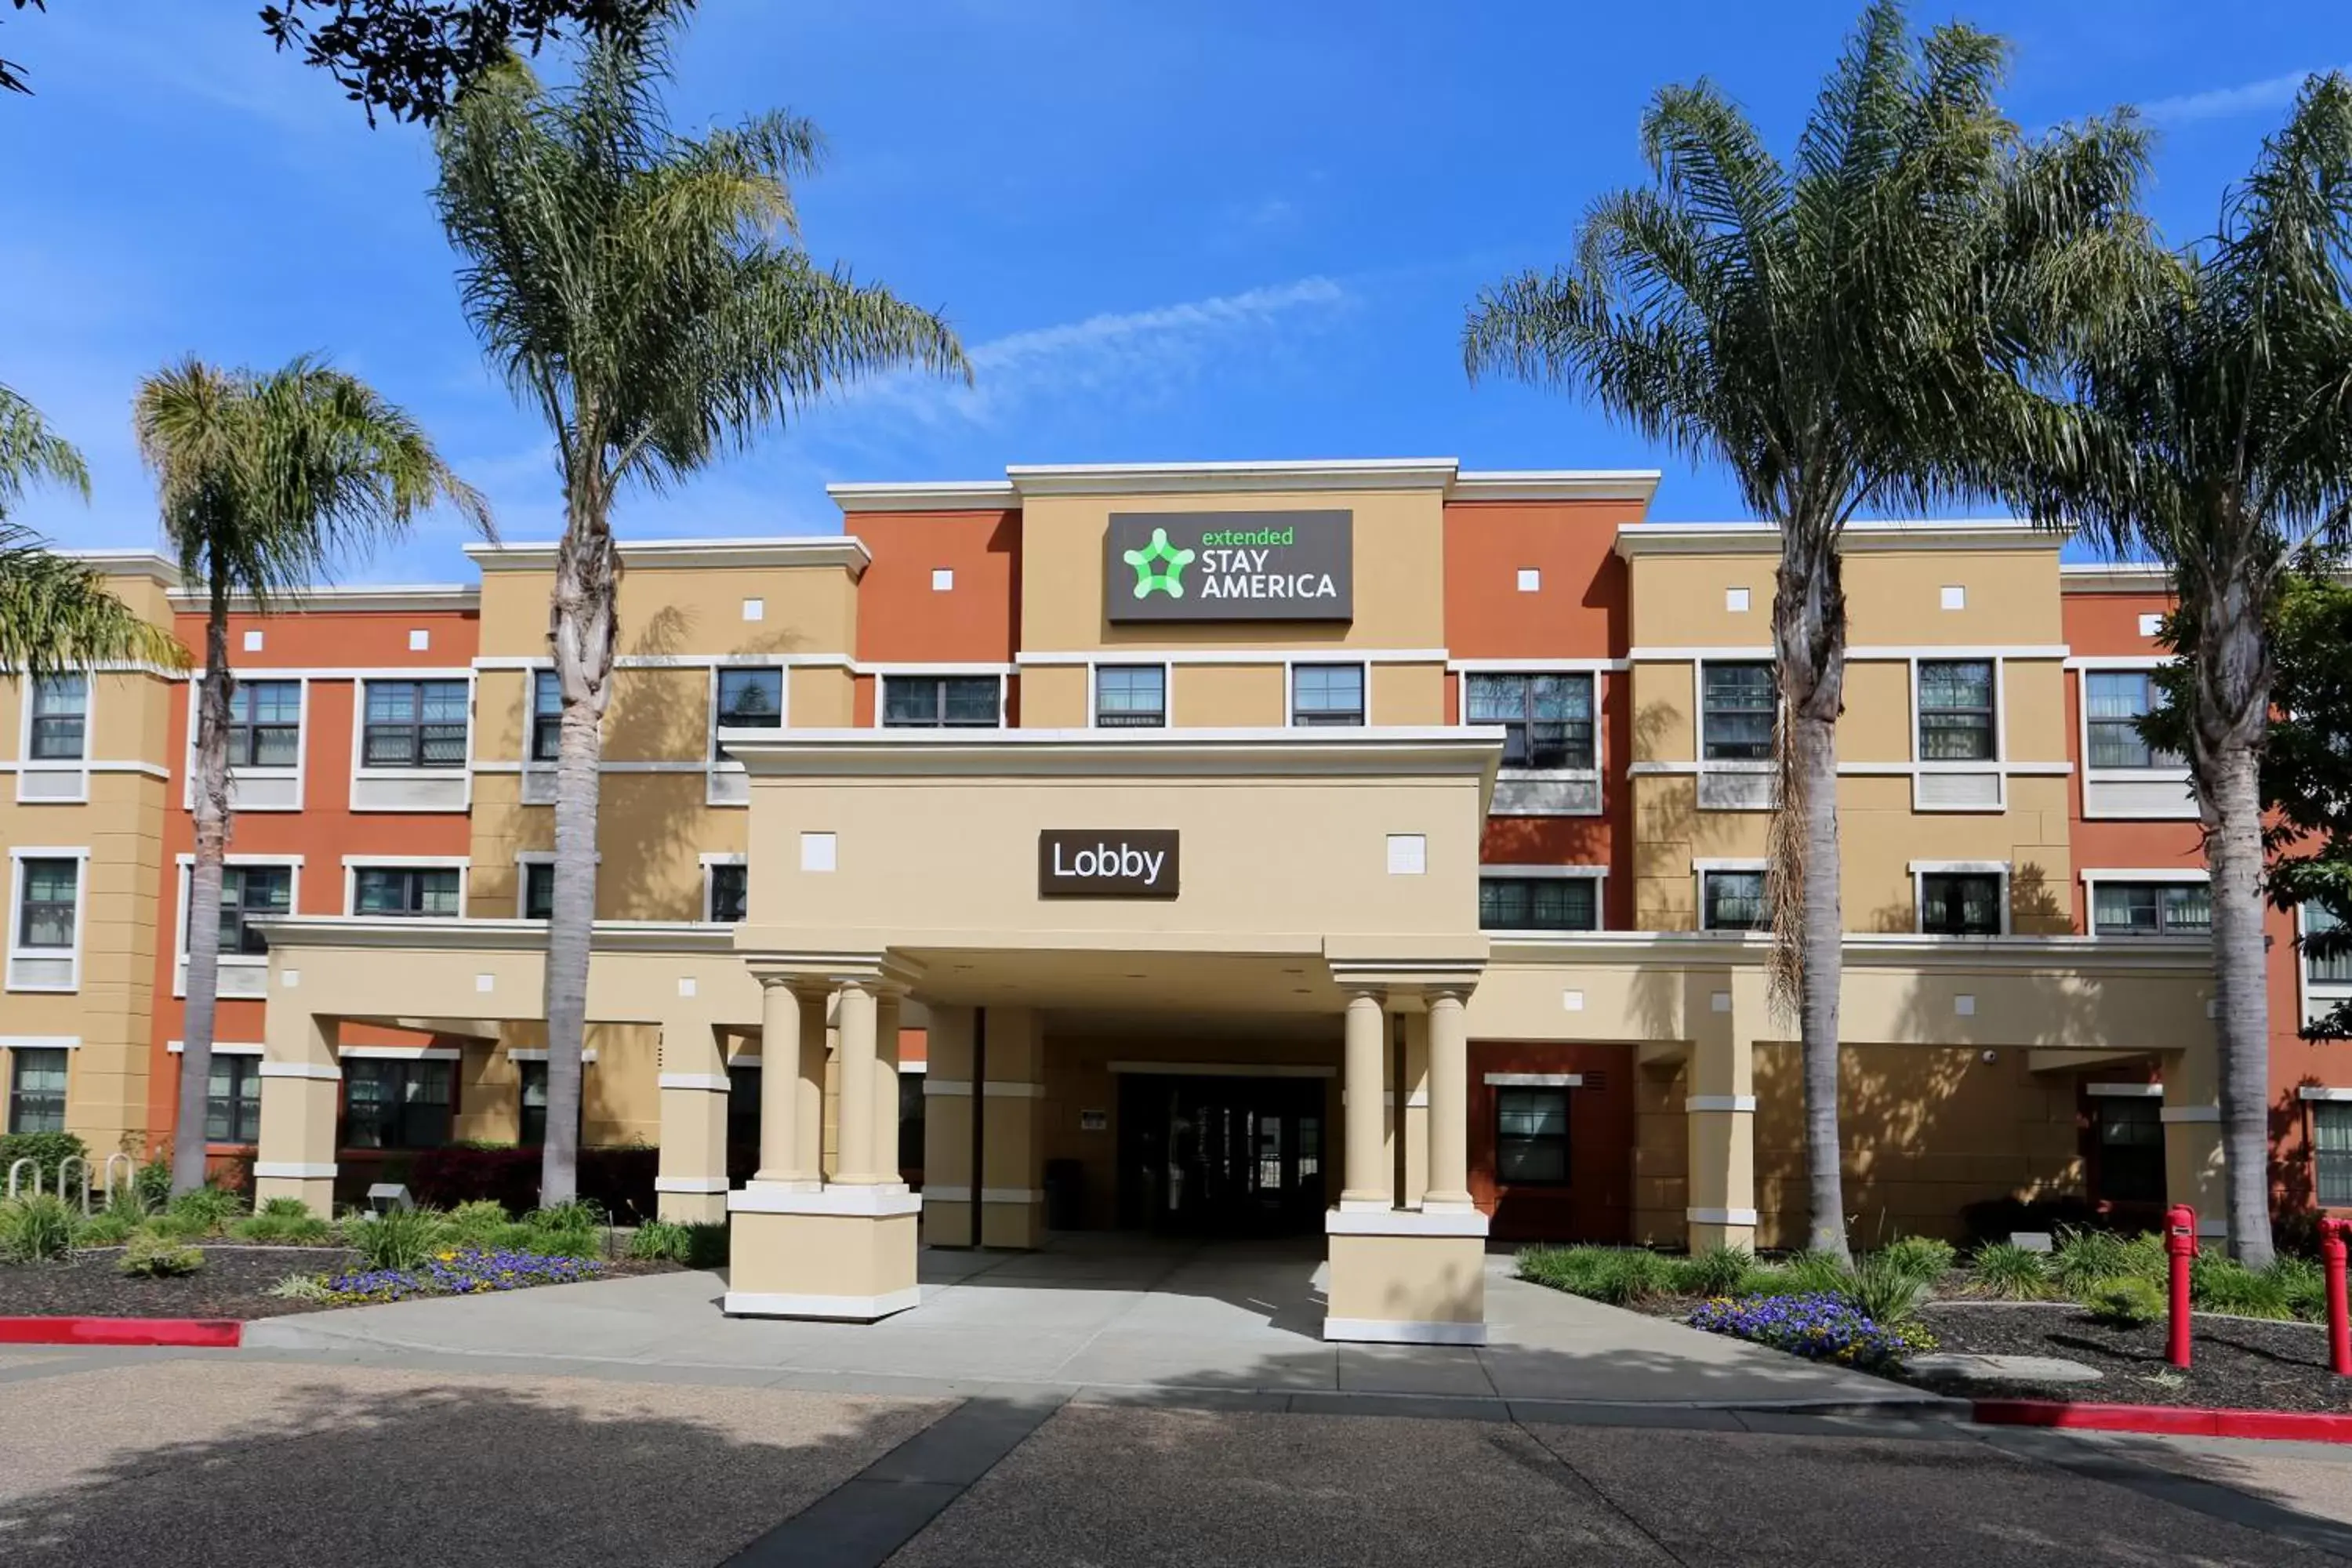 Property Building in Extended Stay America Suites - Oakland - Alameda Airport